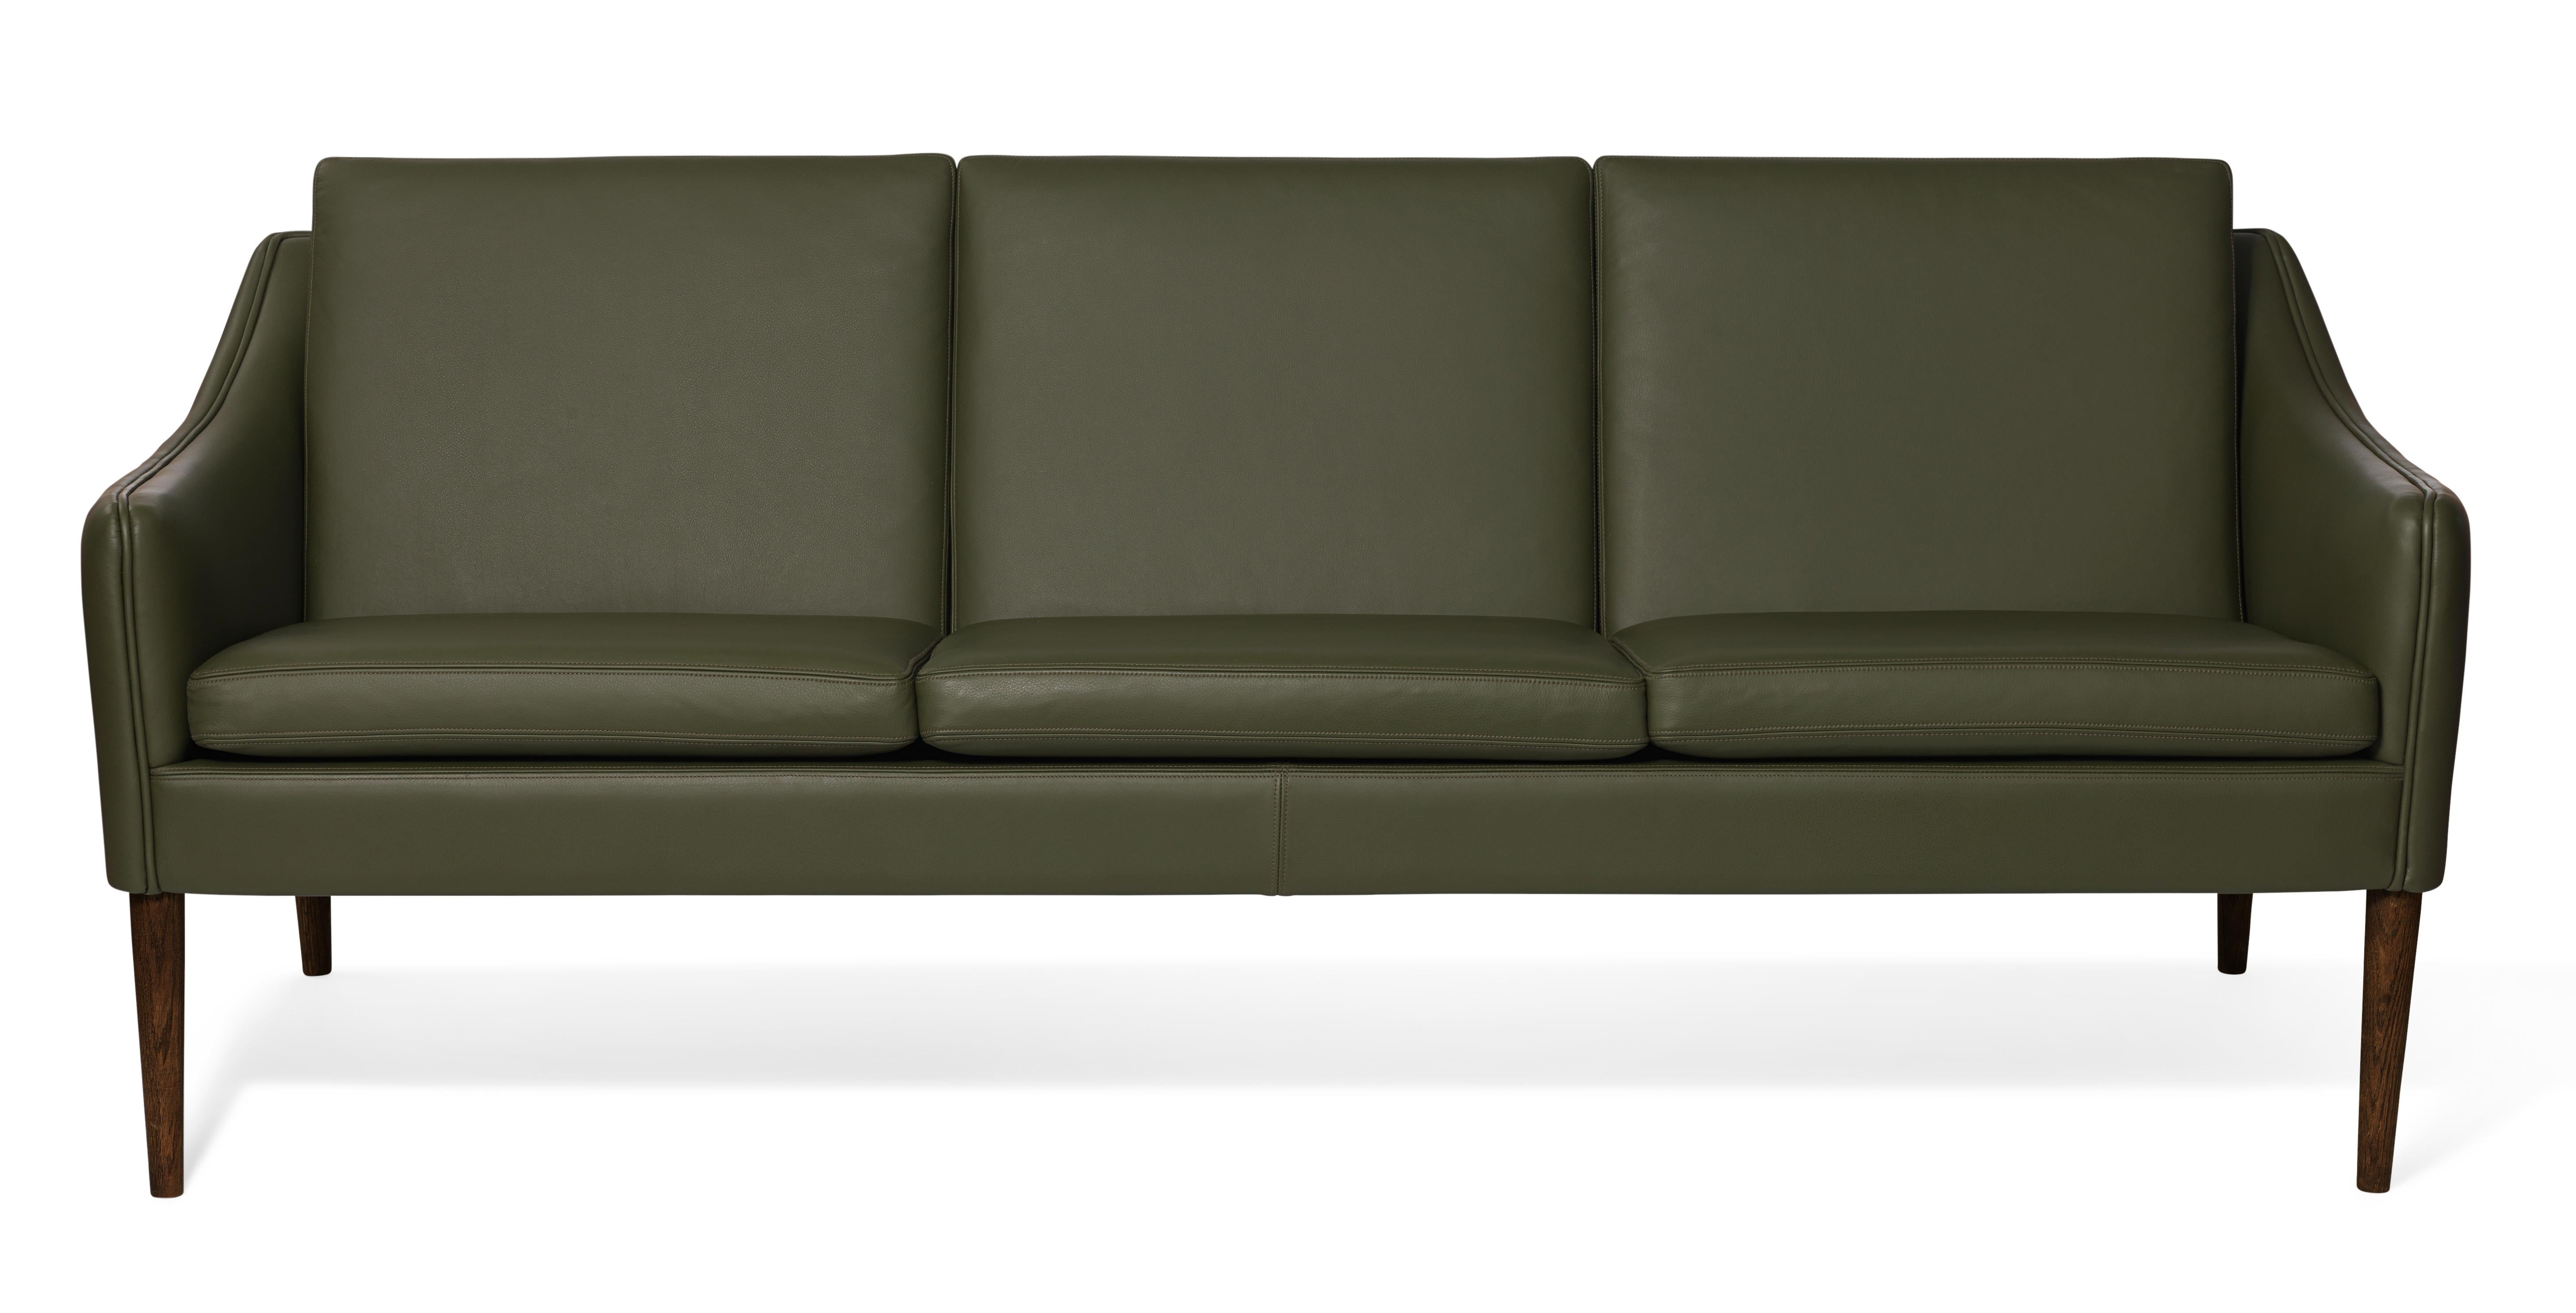 For Sale: Green (Challenger Pickle green) Mr. Olsen 3-Seat Sofa with Walnut Legs, by Hans Olsen from Warm Nordic